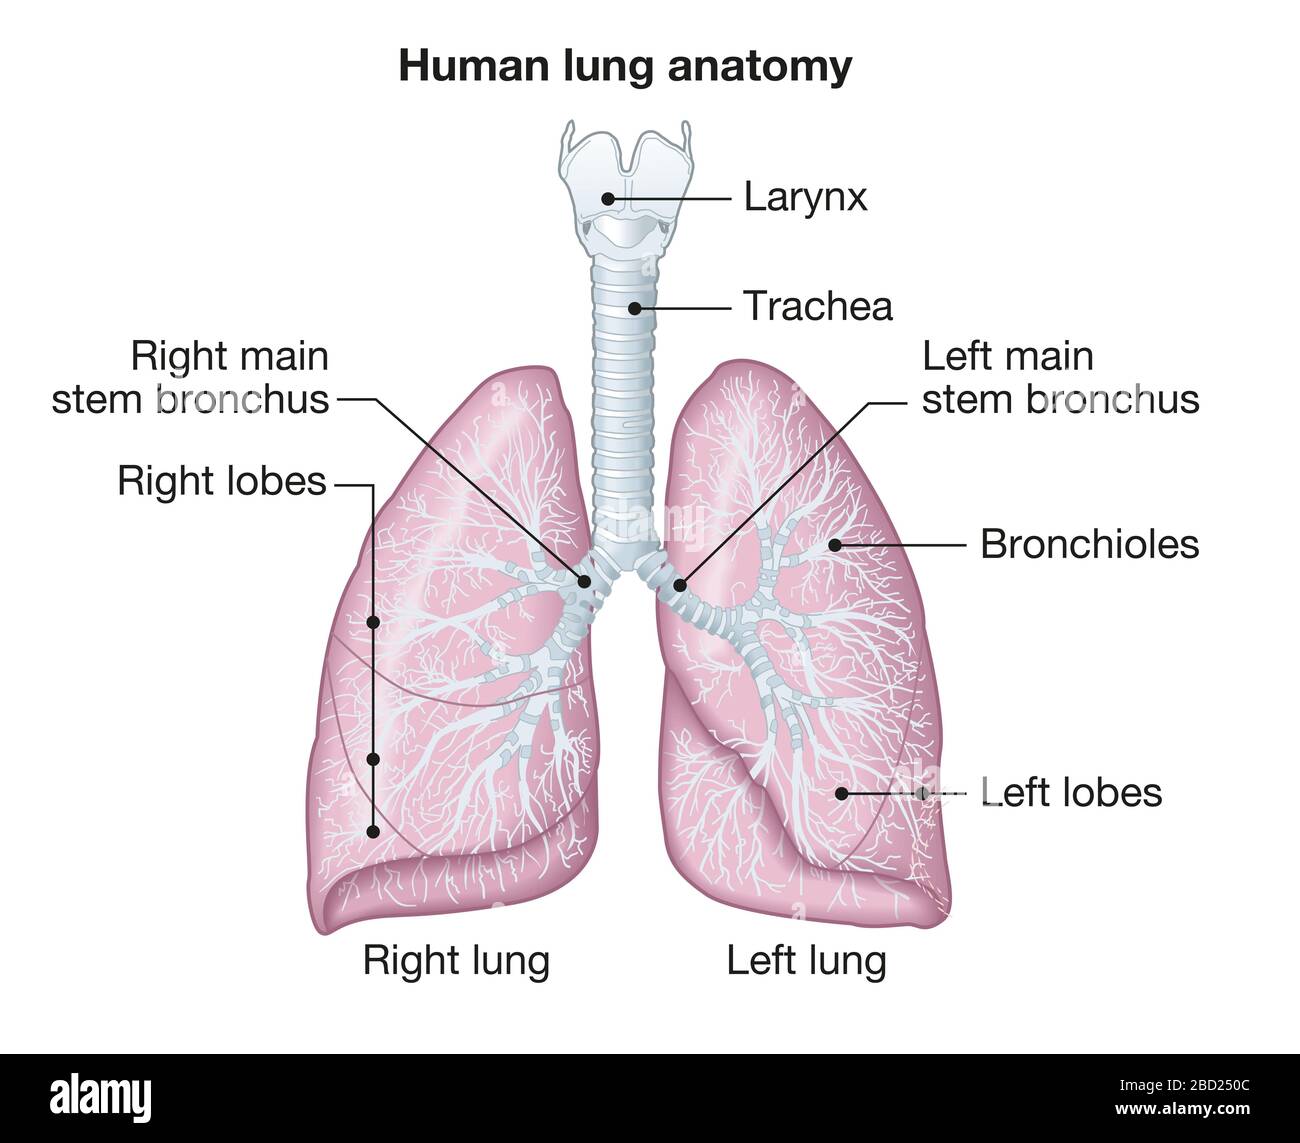 Illustration showing human lungs anatomy with trachea, left and right